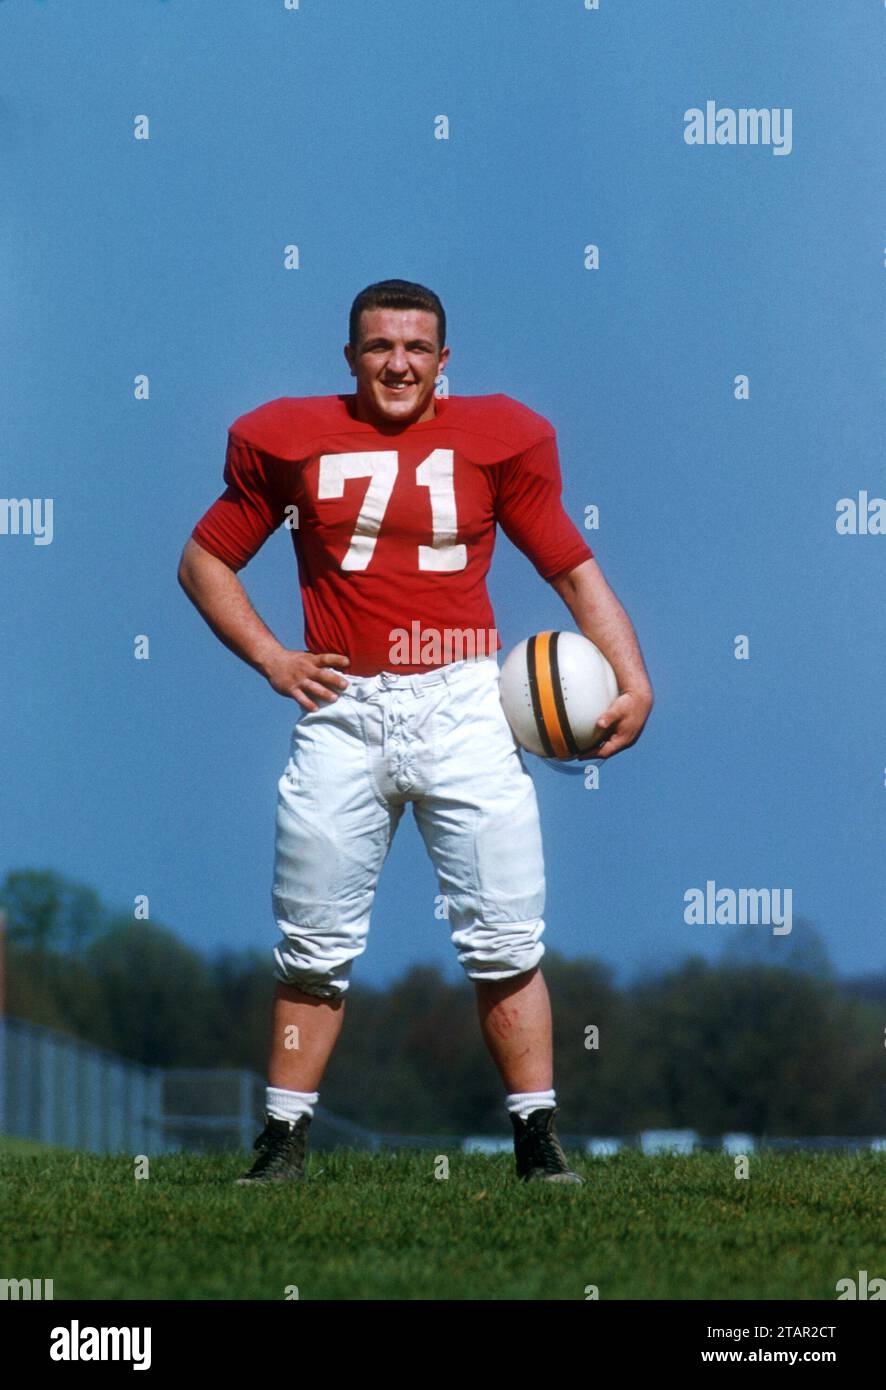 COLLEGE PARK, MD - APRIL 16: Tackle Mike Sandusky #71 of the Maryland Terrapins poses for a portrait during spring practice on April 16, 1955 in College Park, Maryland.  (Photo by Hy Peskin) *** Local Caption *** Mike Sandusky Stock Photo